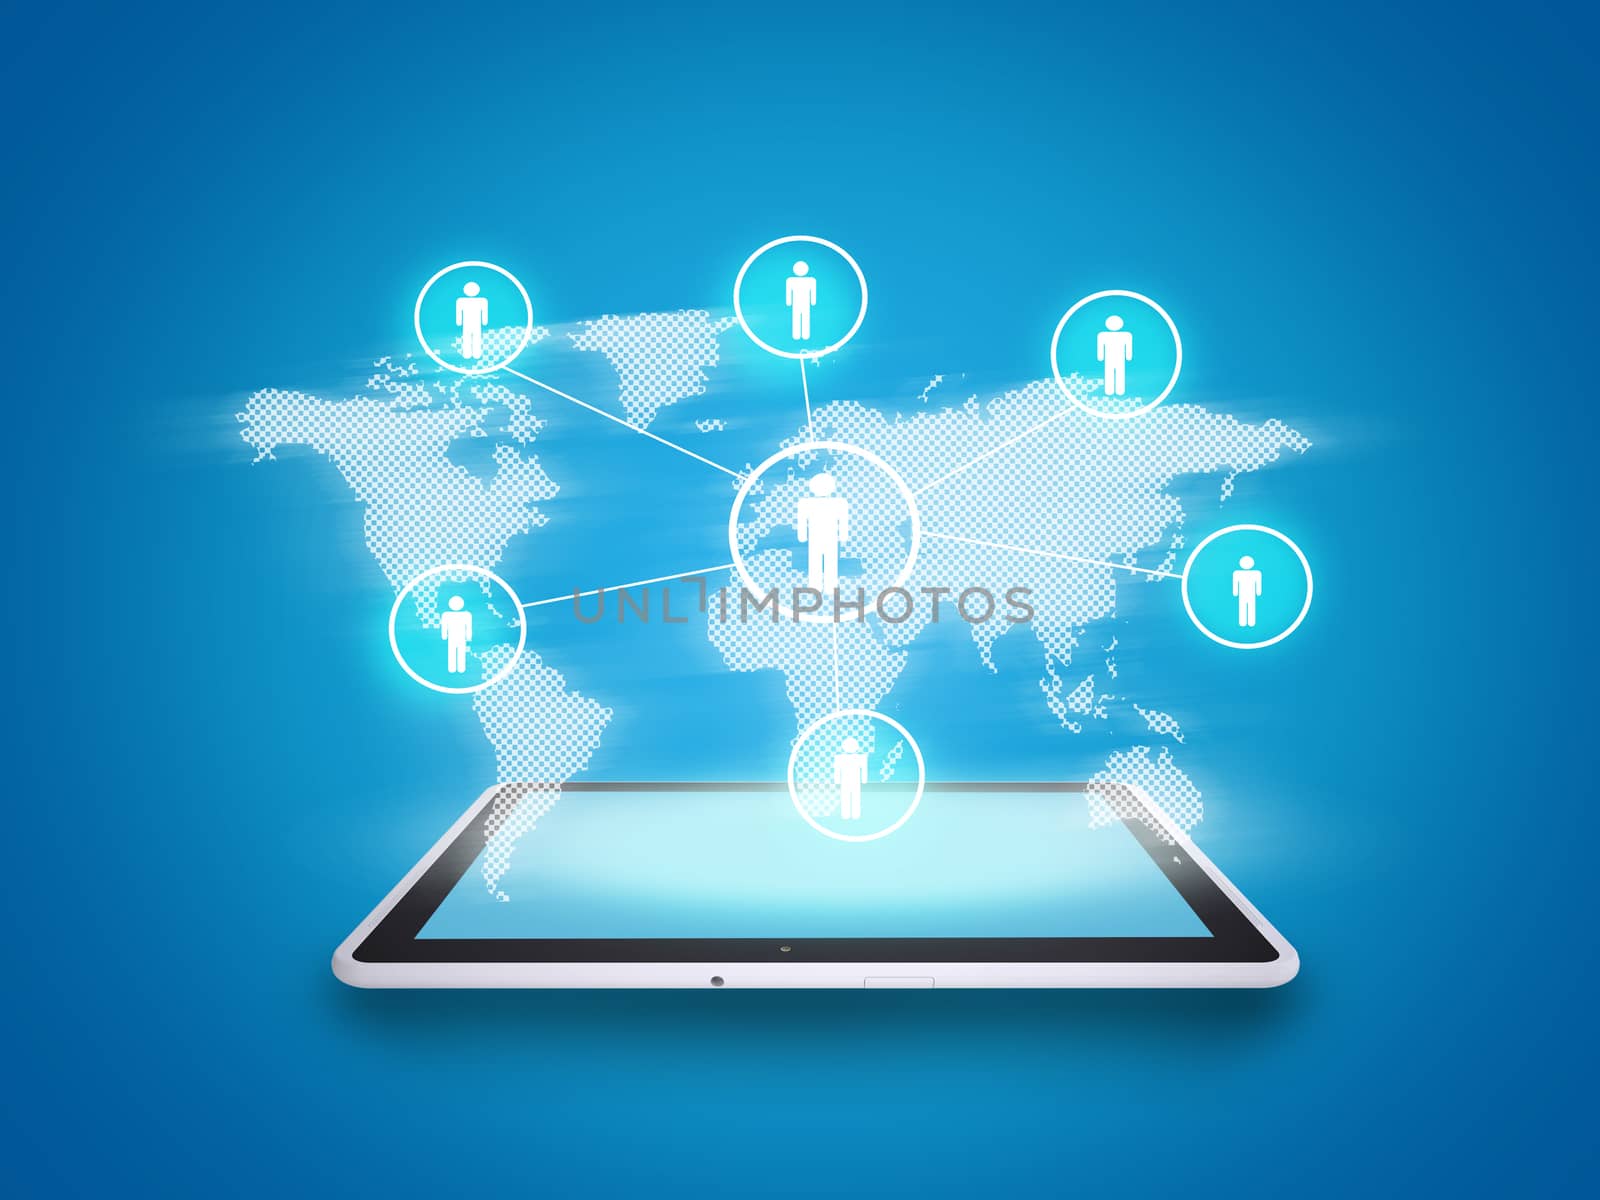 Tablet on abstract blue background with people symbols and world map